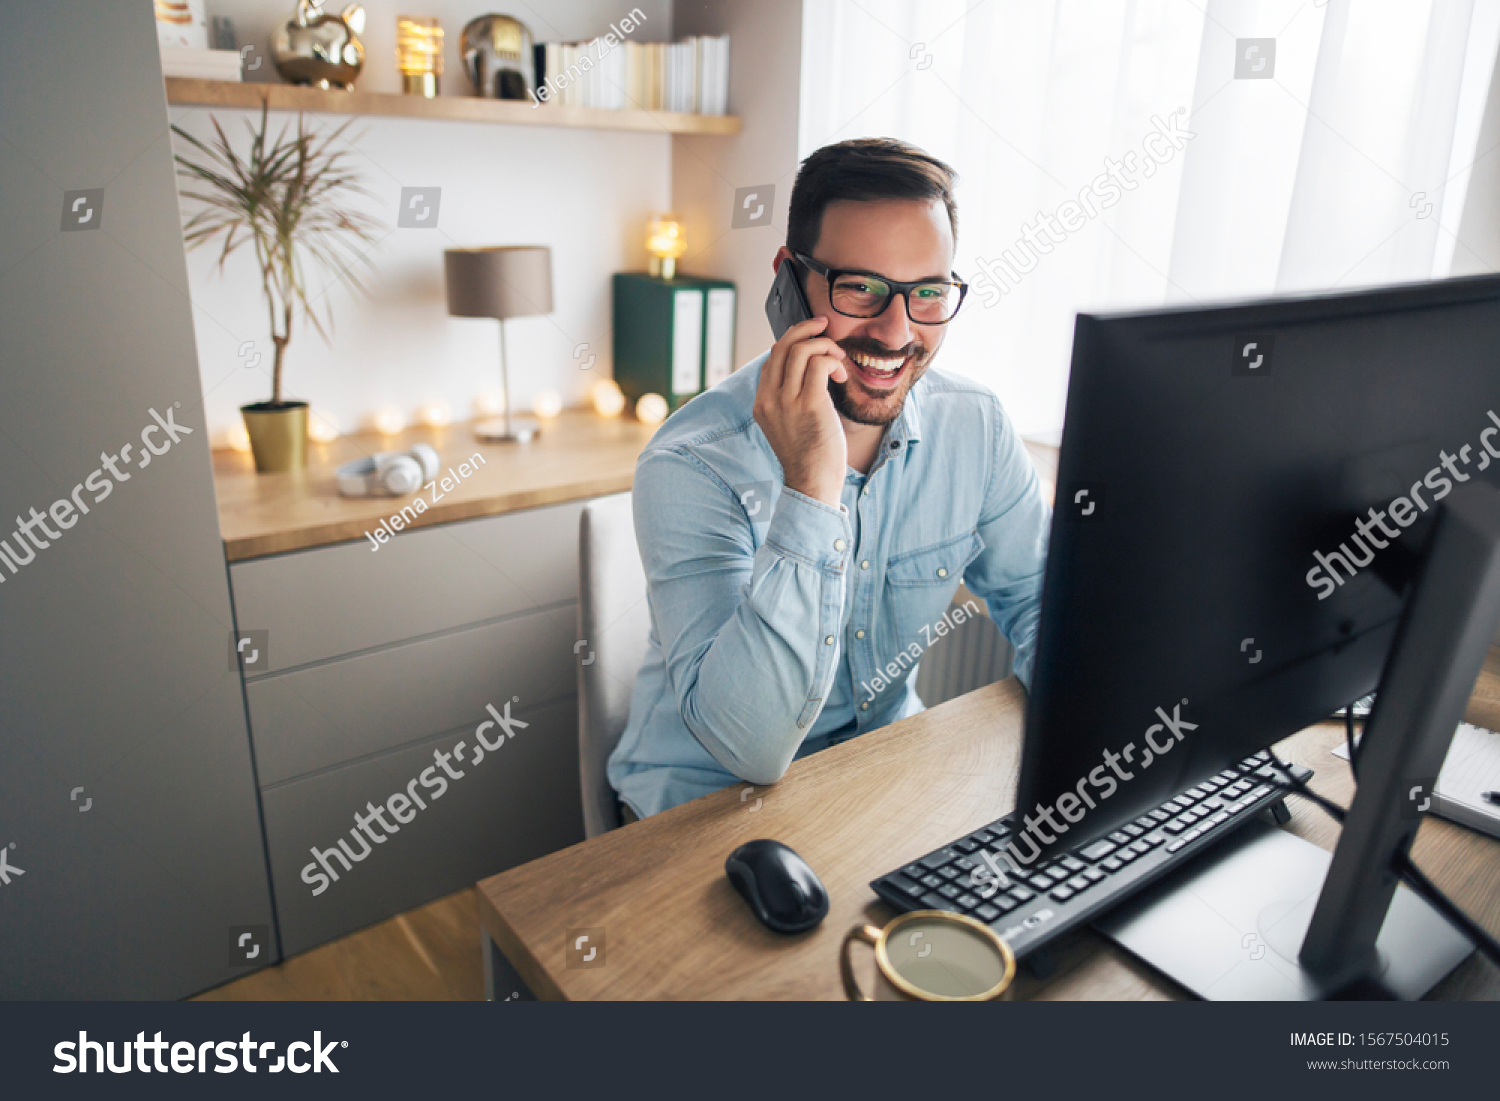 Smiling handsome freelancer working remotely from home. He is speaking on the phone. #1567504015